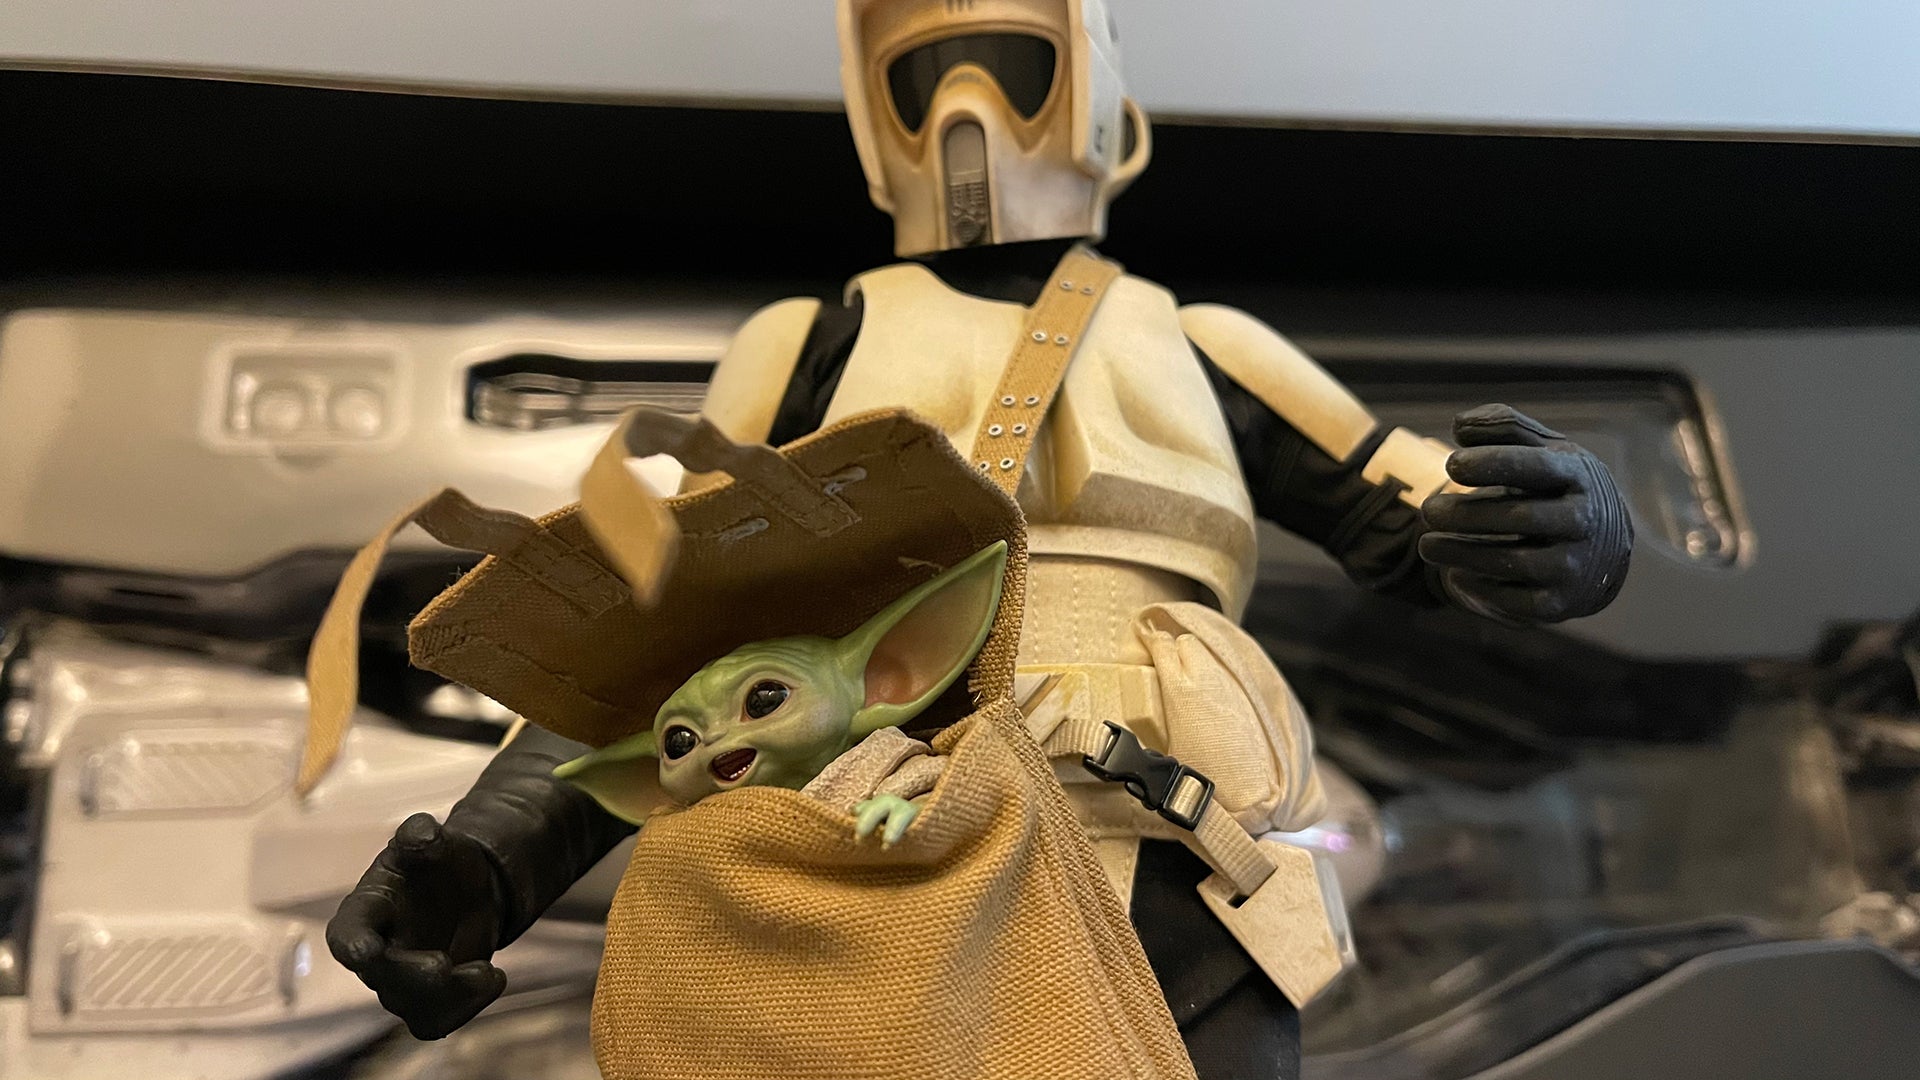 Does Baby Yoda count as a carry on?  (Photo: Mike Fahey / Kotaku)